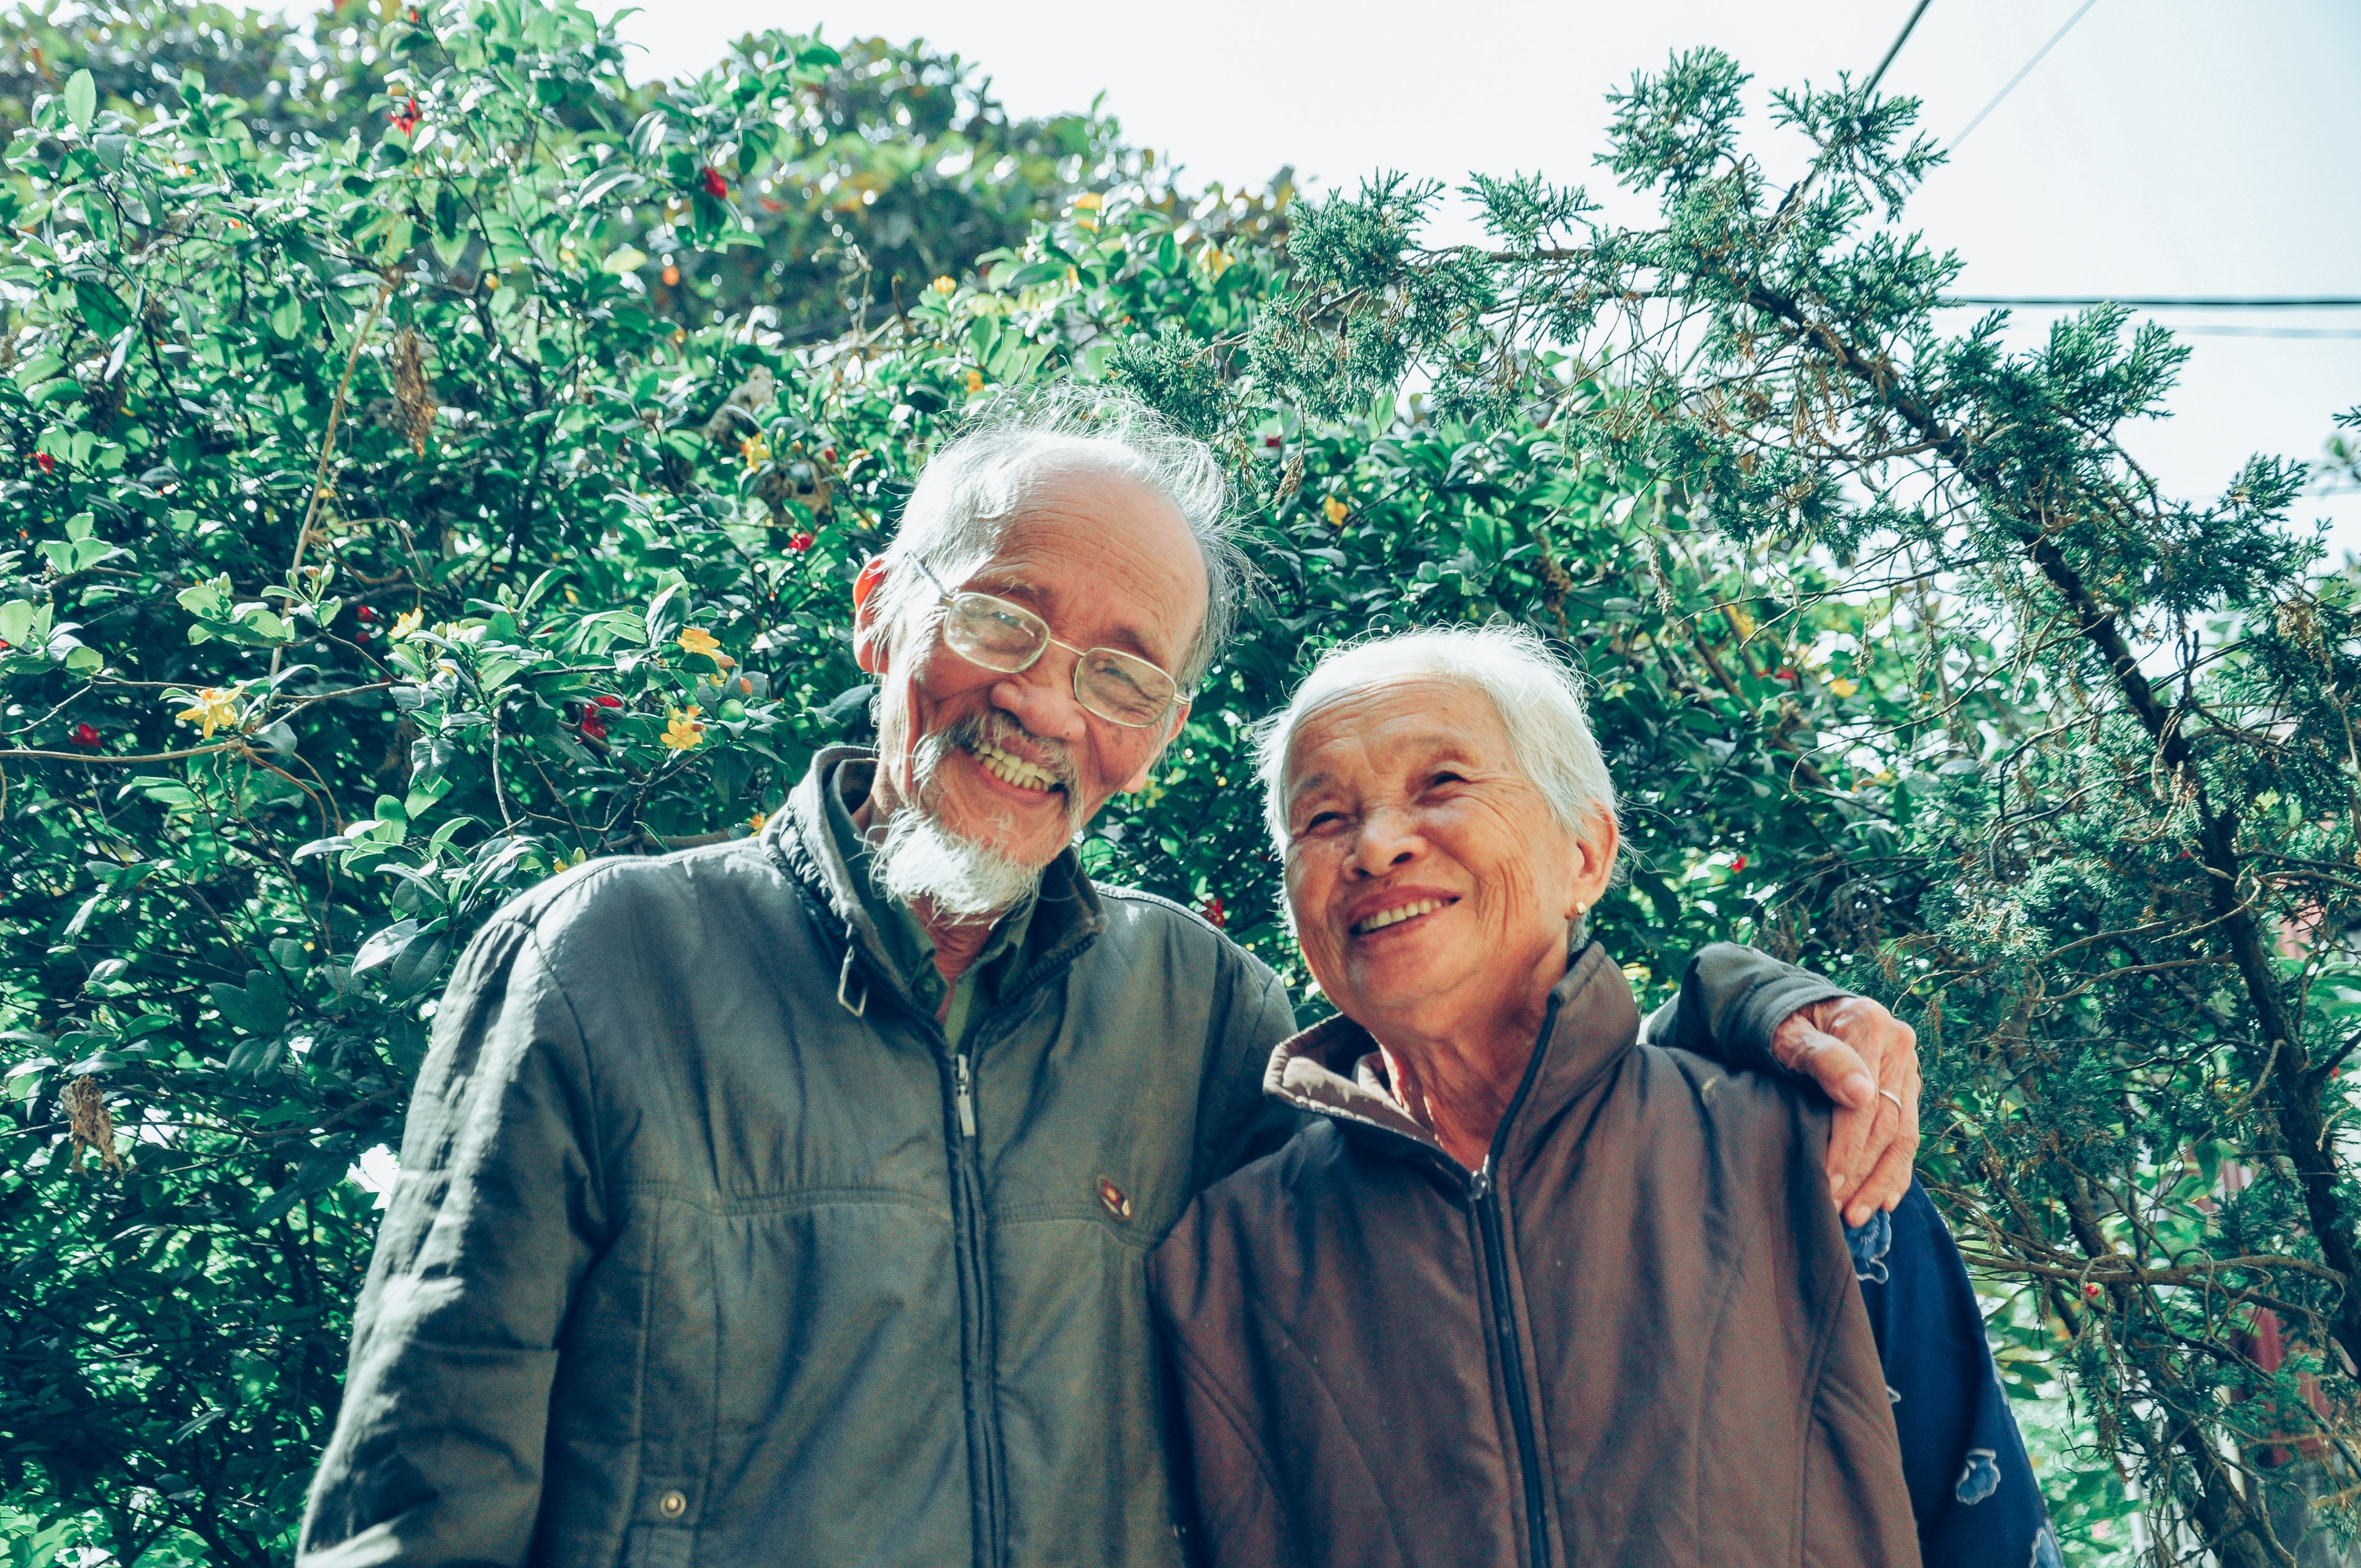 A smiling elderly couple.